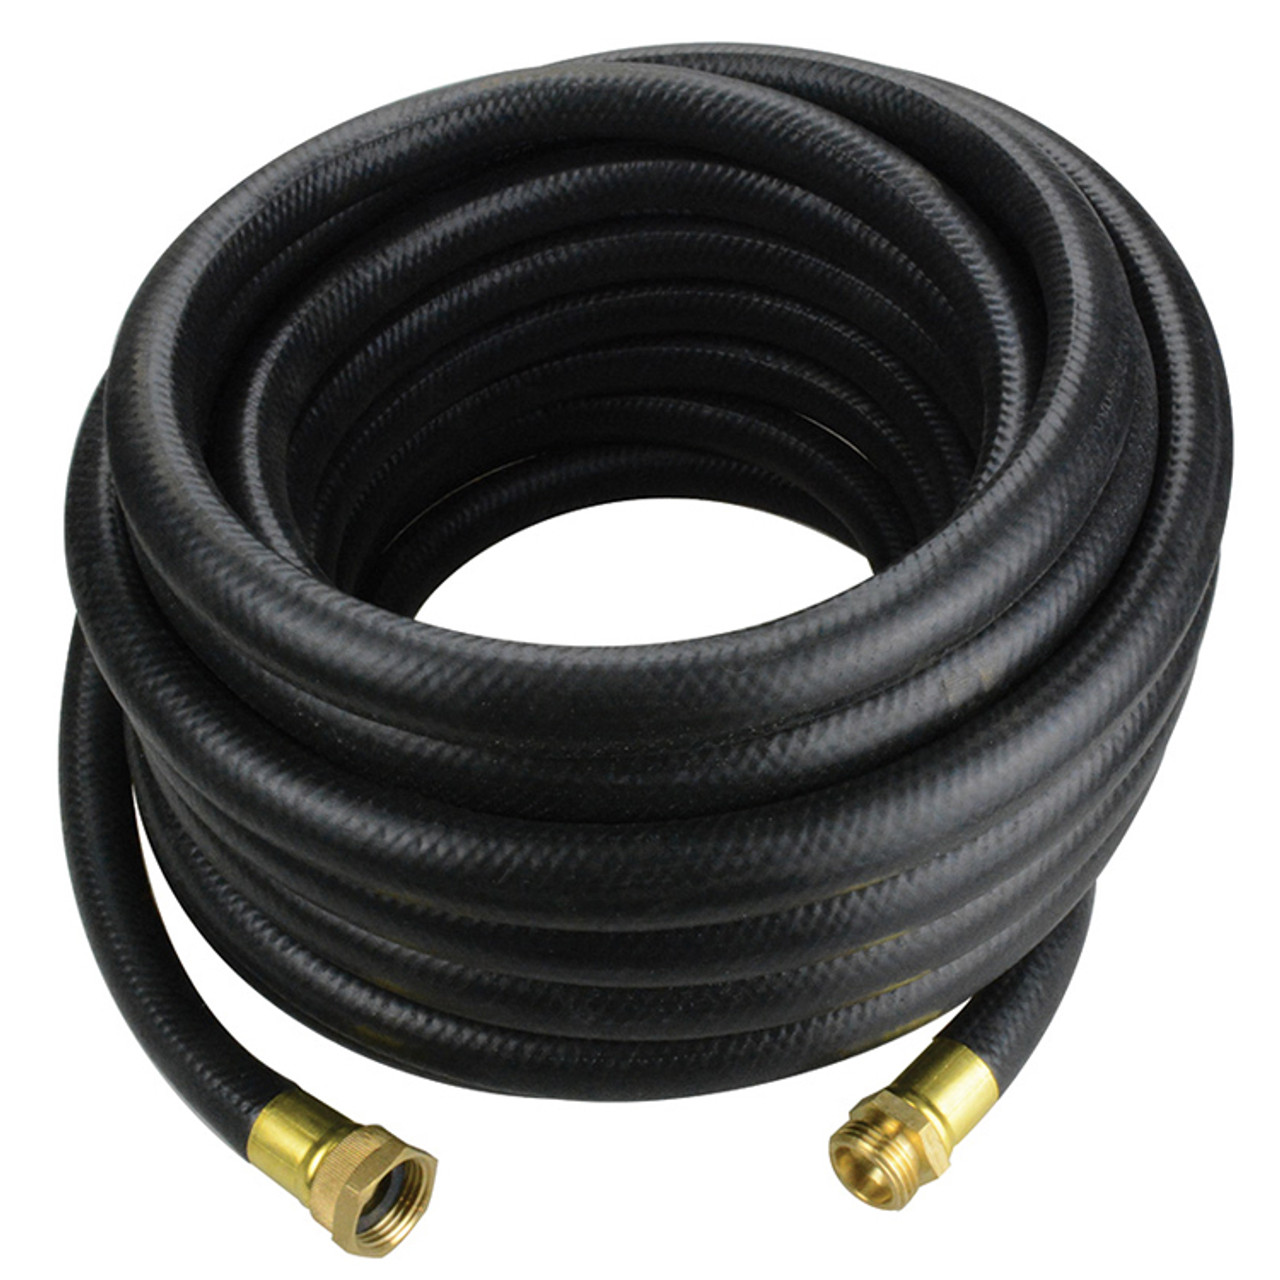 1/2" x 25' Industrial Water Hose Assembly   G311-050GHT25